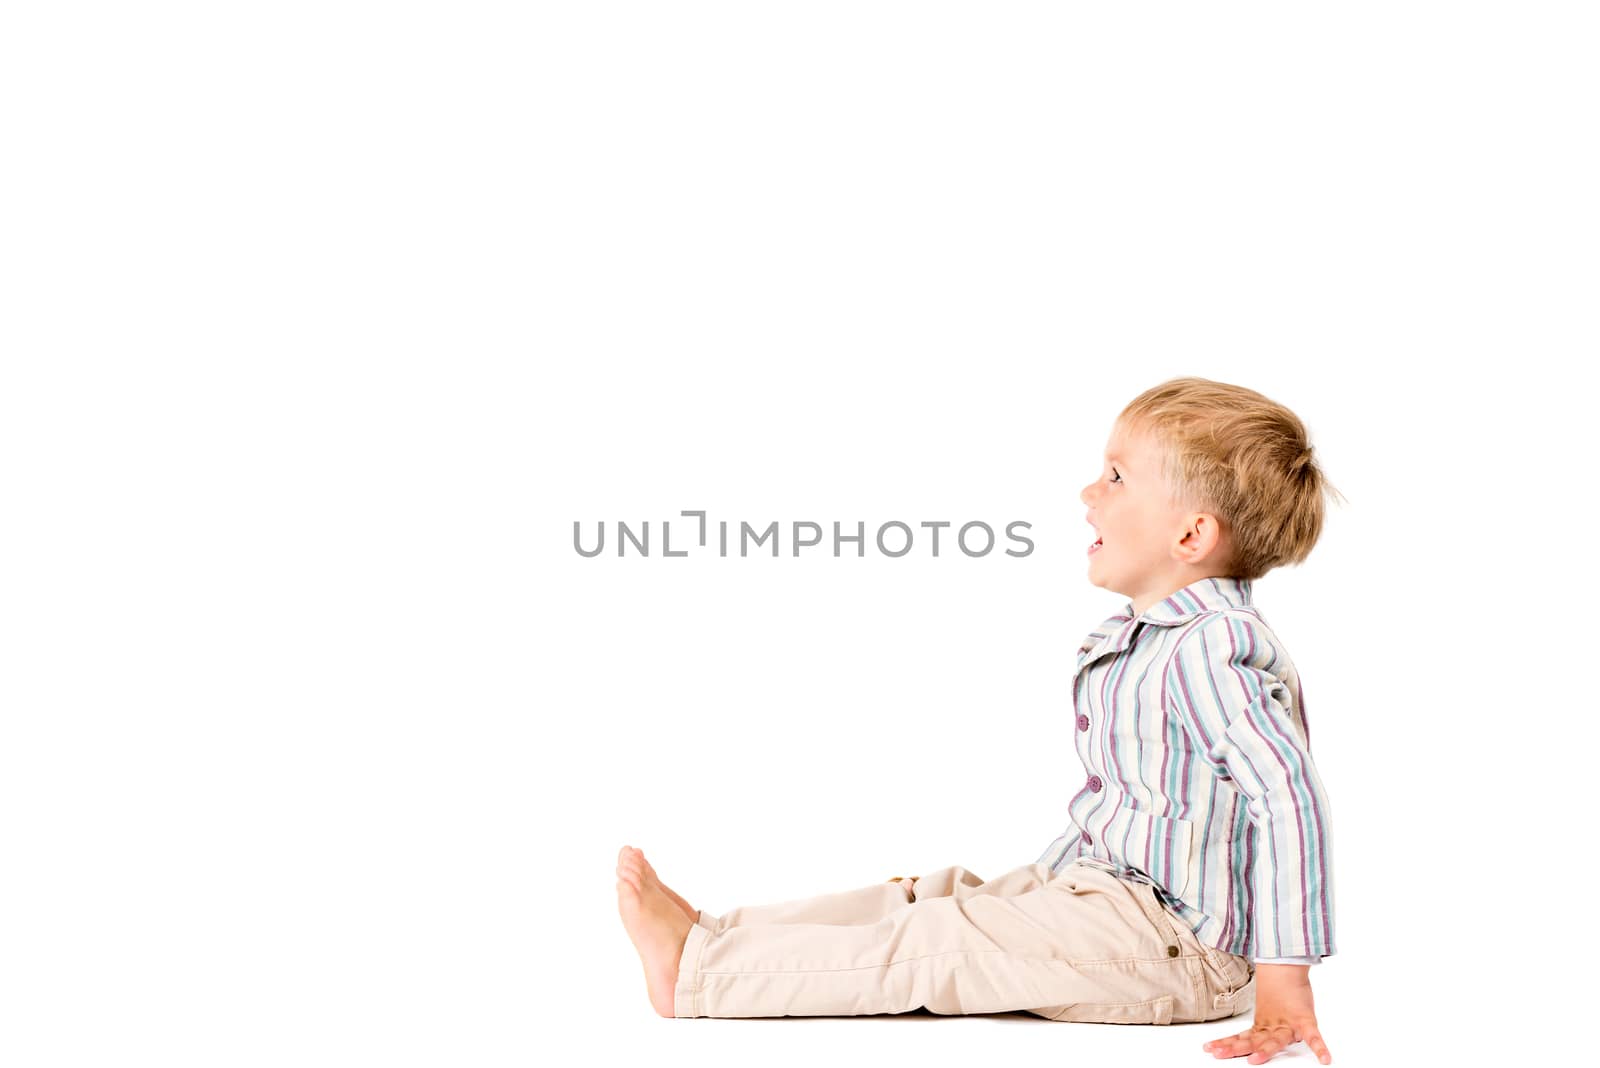 Boy shot in the studio on a white background with copy space by Nanisimova